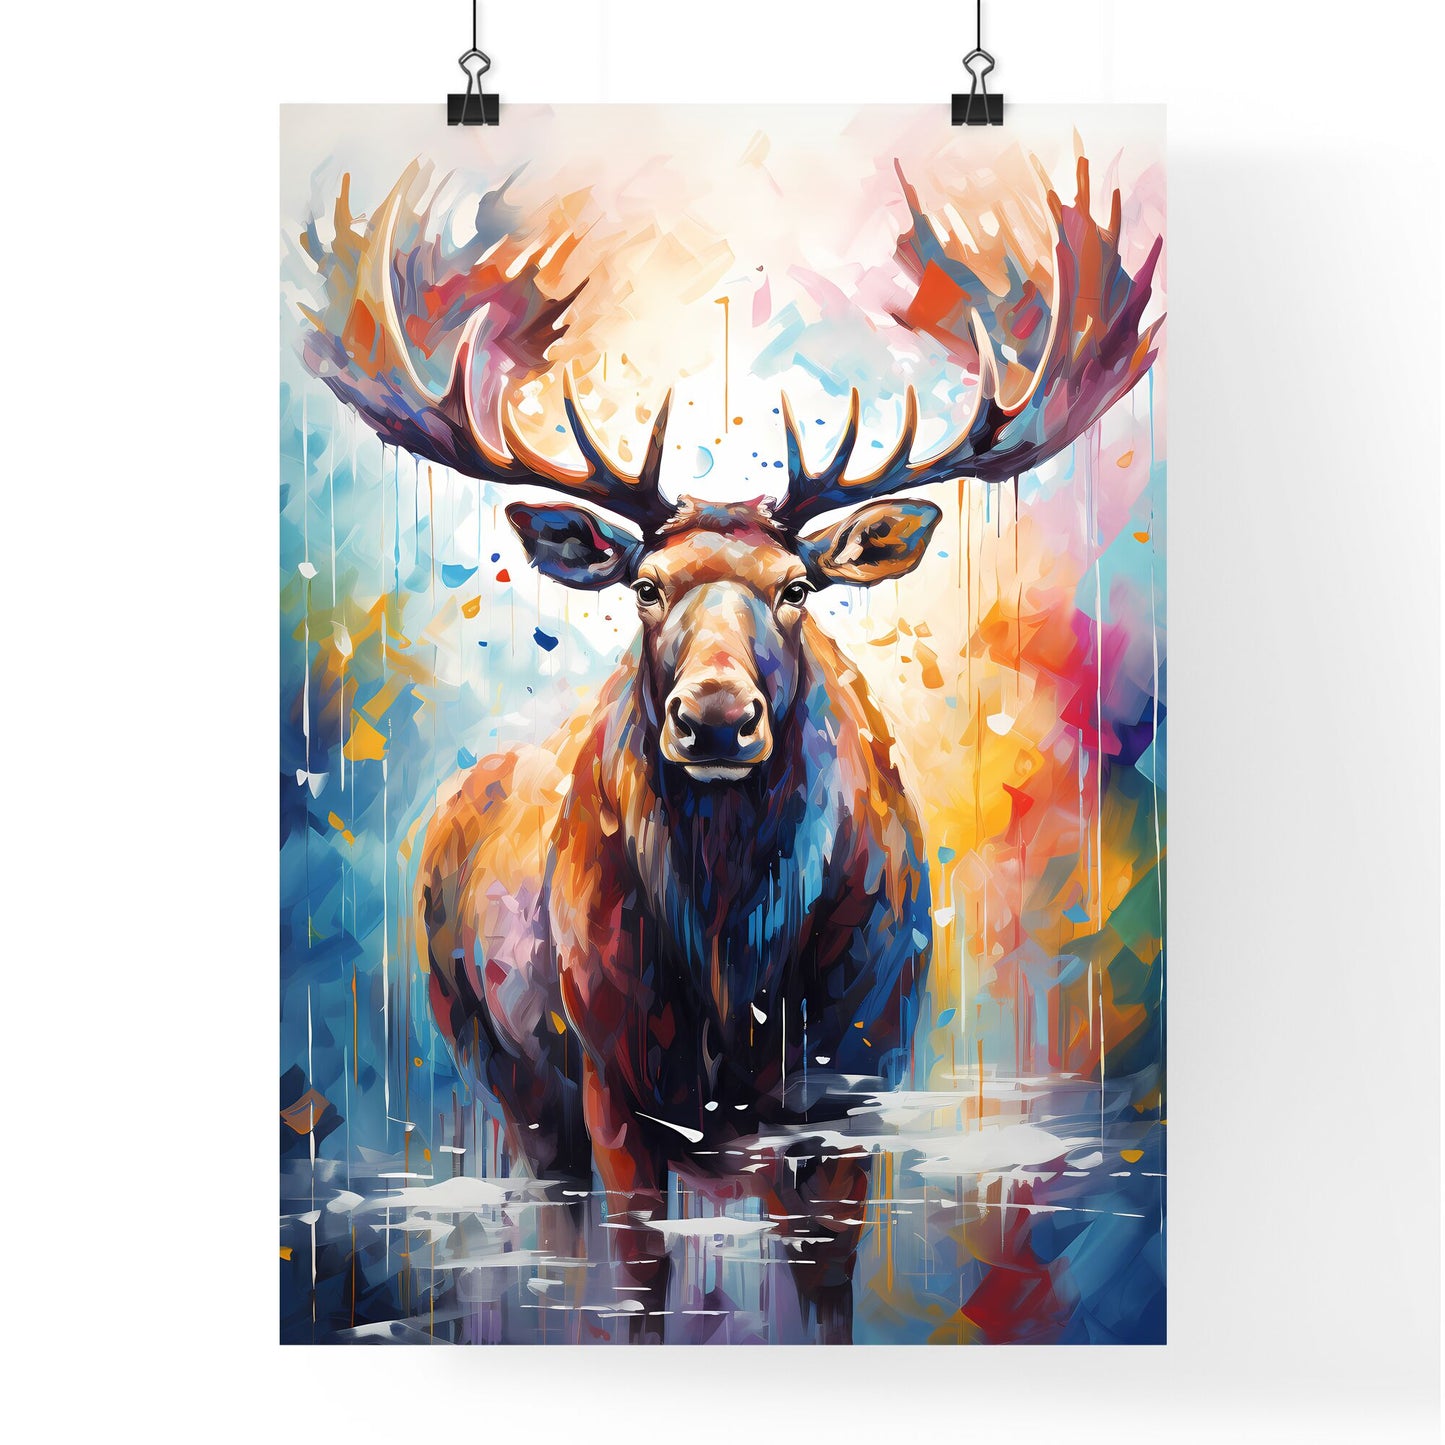 Silhouette Moose On White Background - A Moose With Large Antlers Default Title